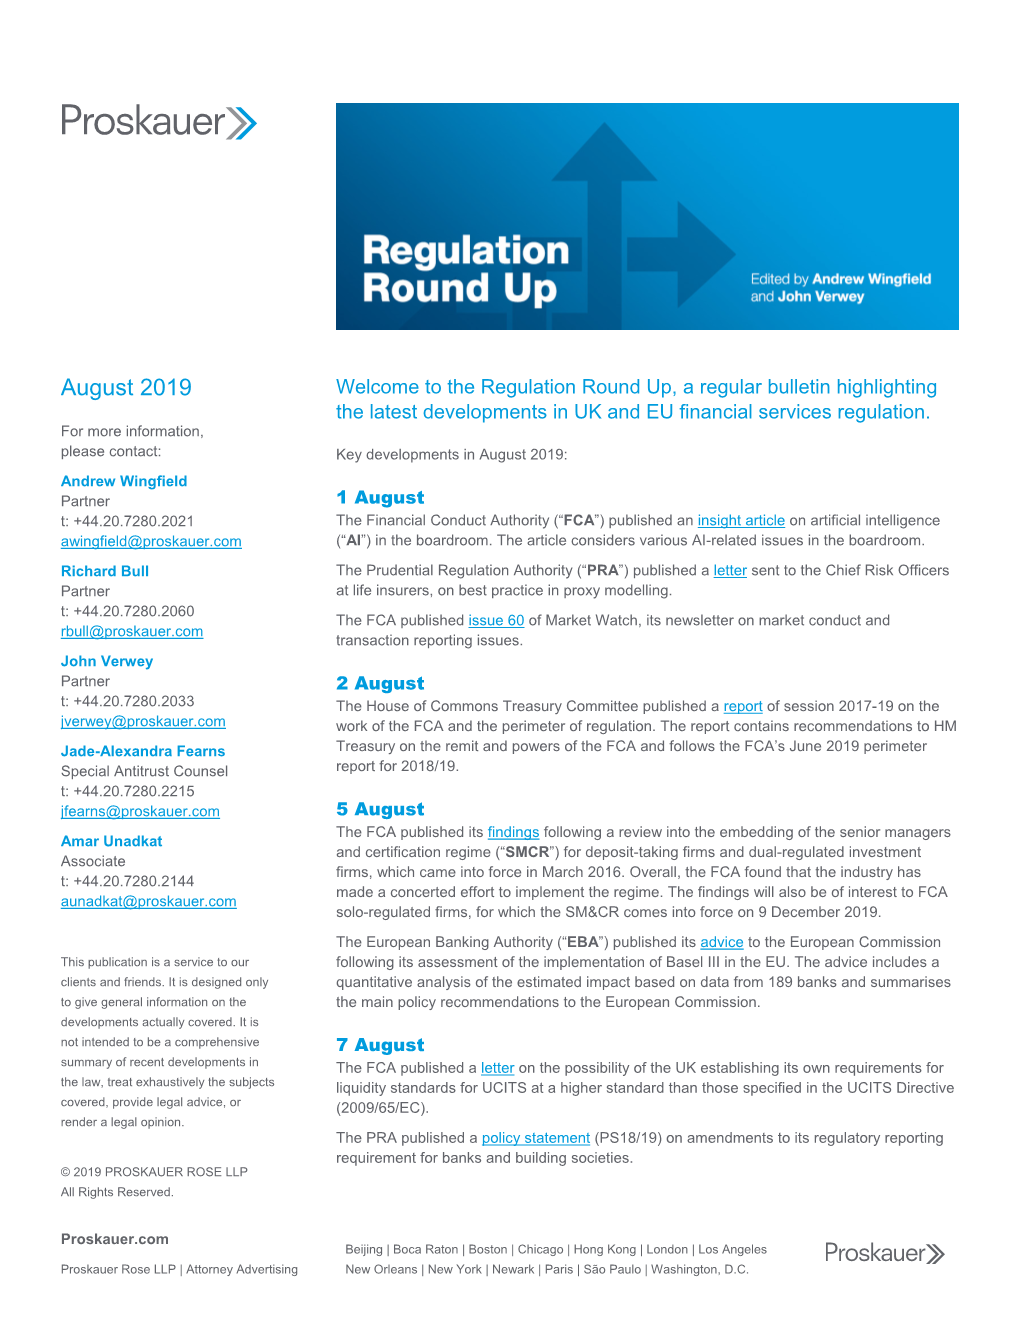 August 2019 Welcome to the Regulation Round Up, a Regular Bulletin Highlighting the Latest Developments in UK and EU Financial Services Regulation